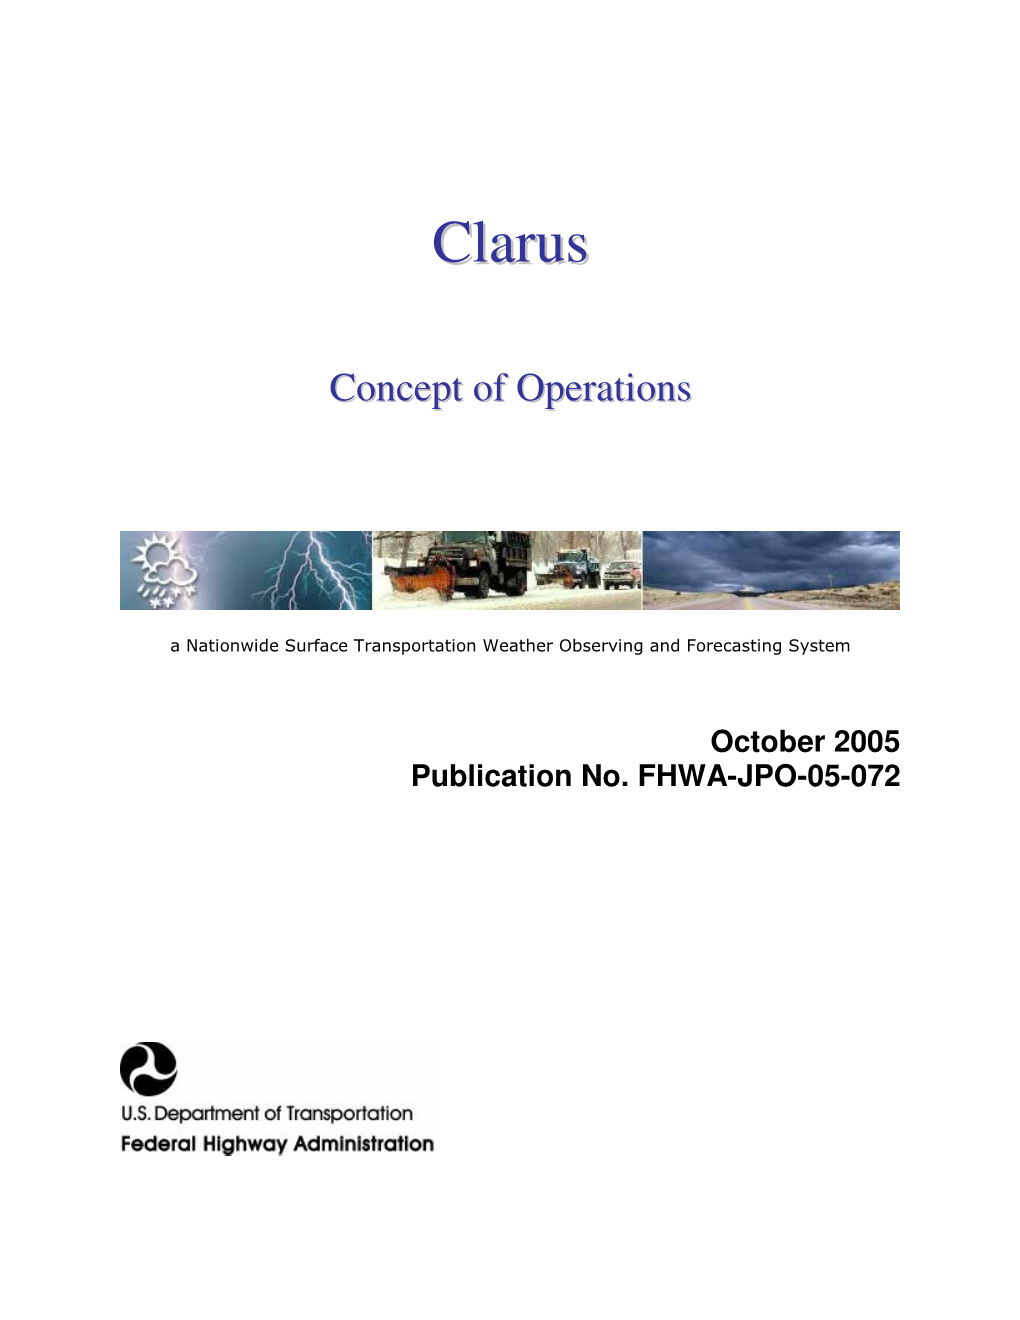 Clarus: Concept of Operations 6